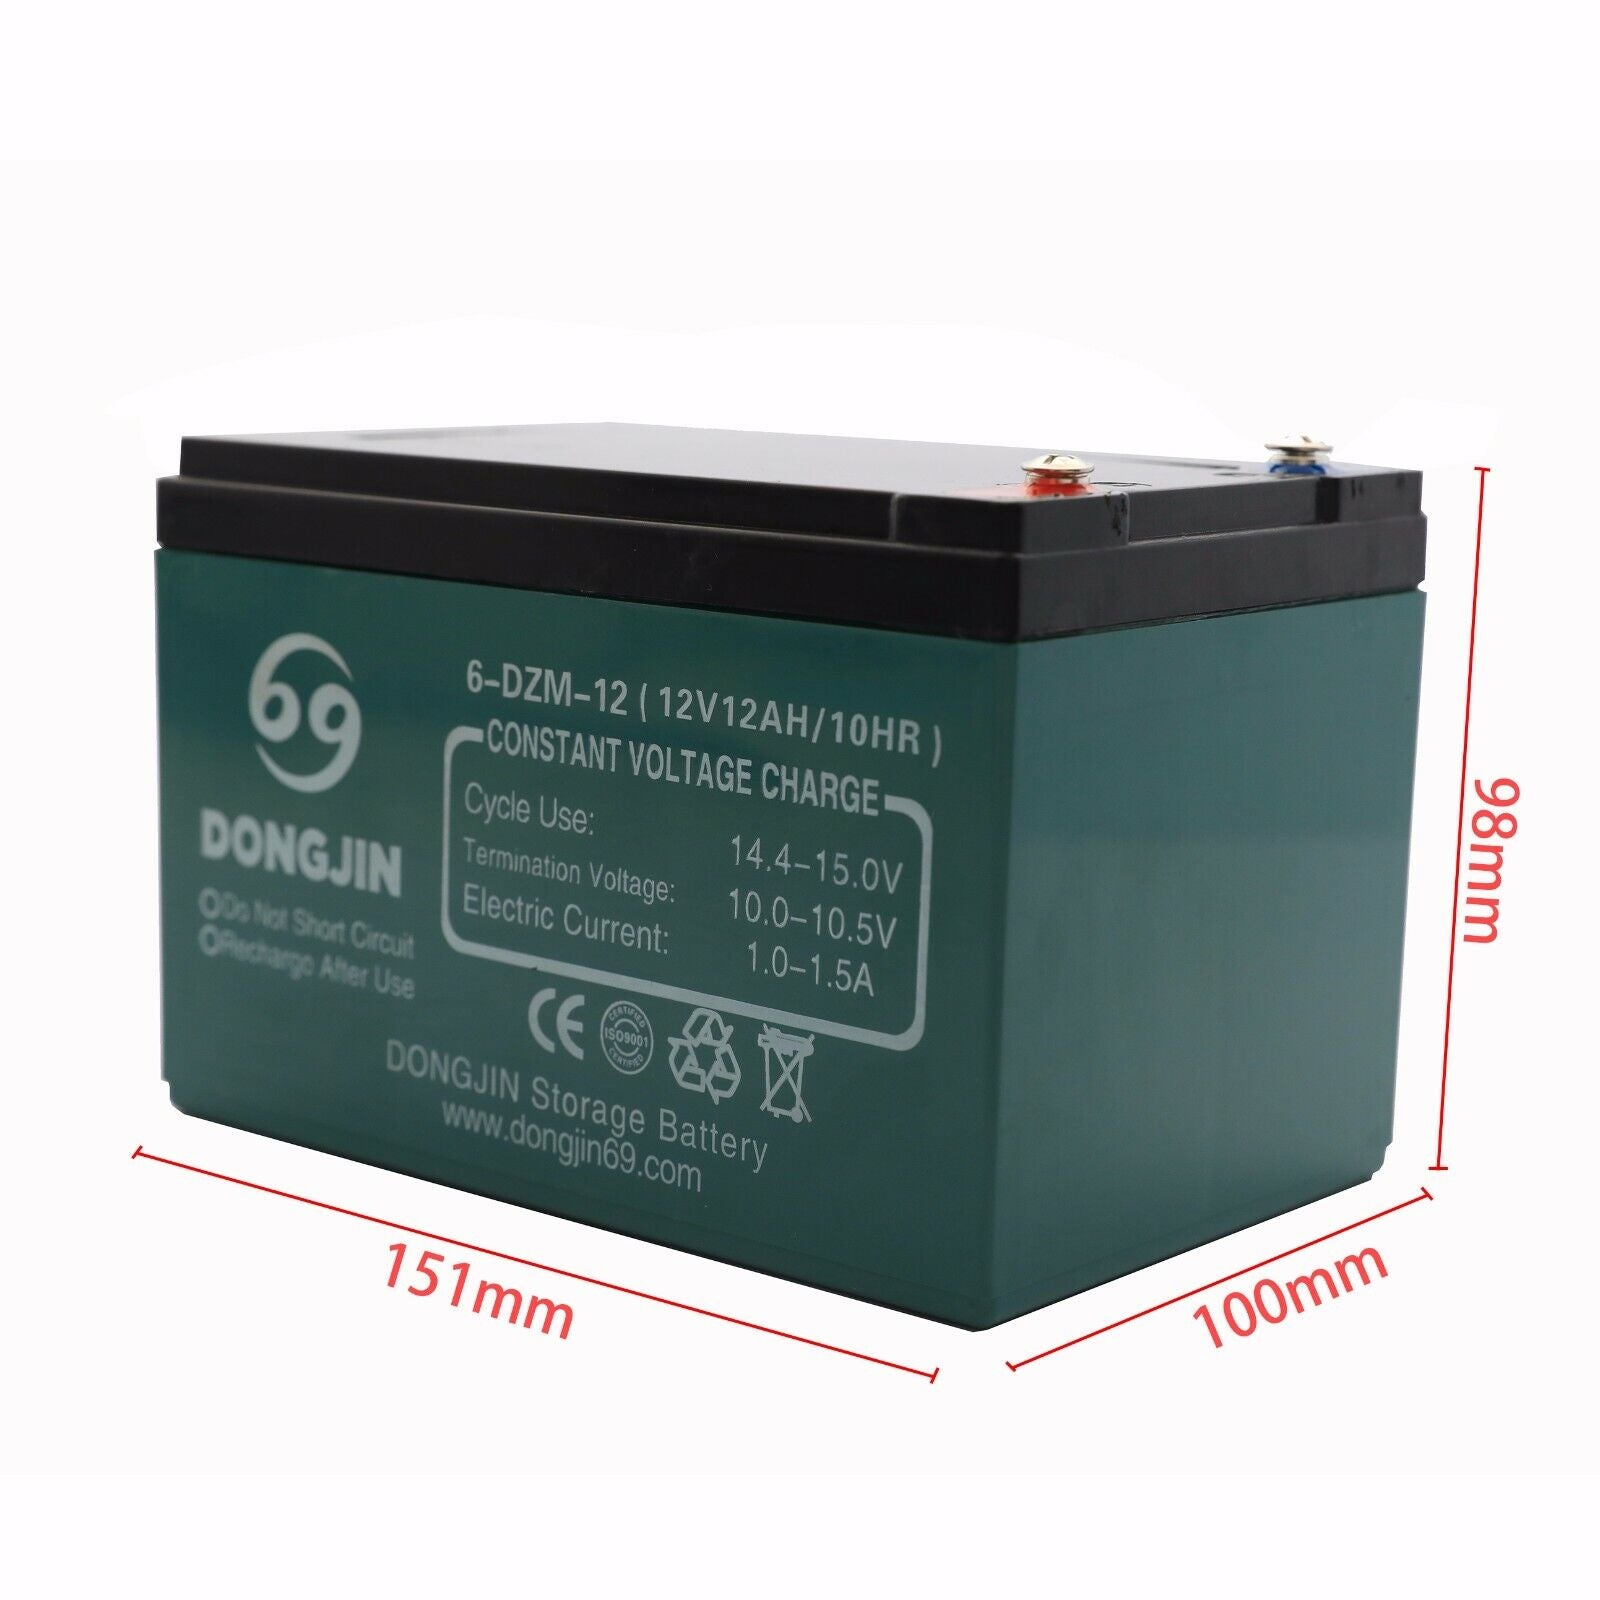 4 Pack 6-DZM-12 12V 12Ah SLA Battery for MotoTec Electric Scooters